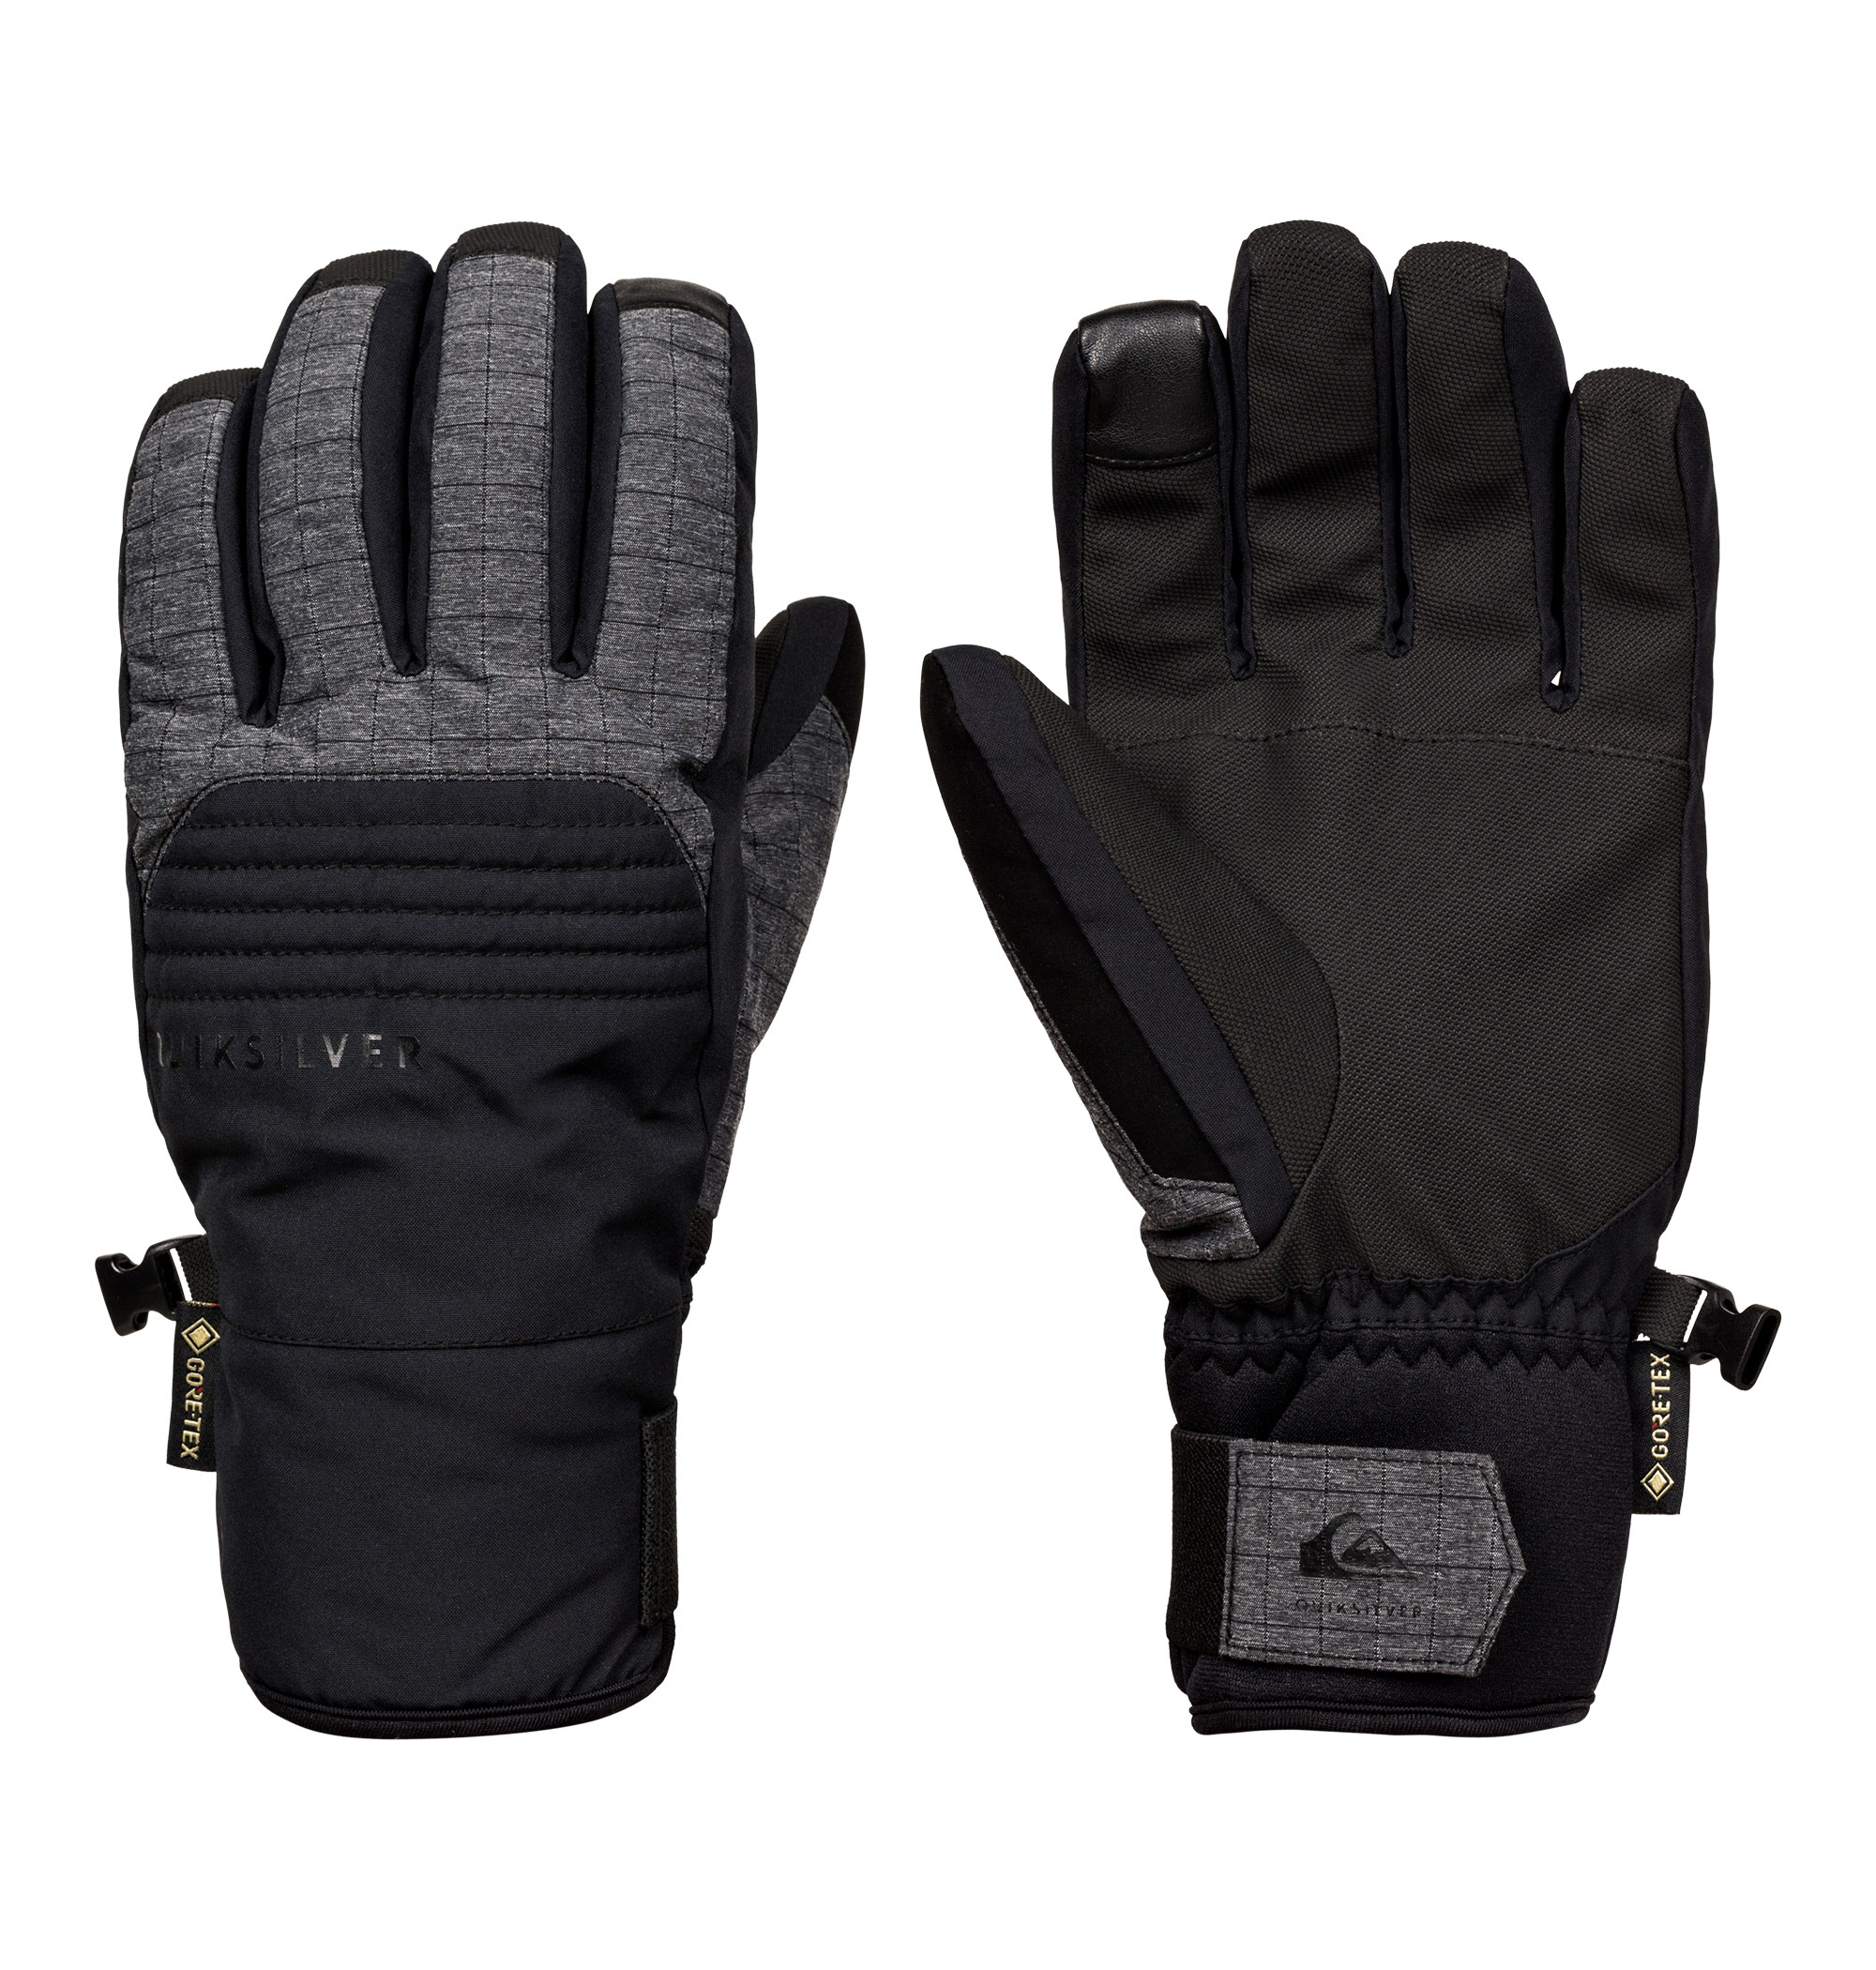 30%OFF！＜Quiksilver＞ HILL GORE-TEX GLOVE【送料無料】 配色切り替え×ステッチデザインが魅力のグローブ